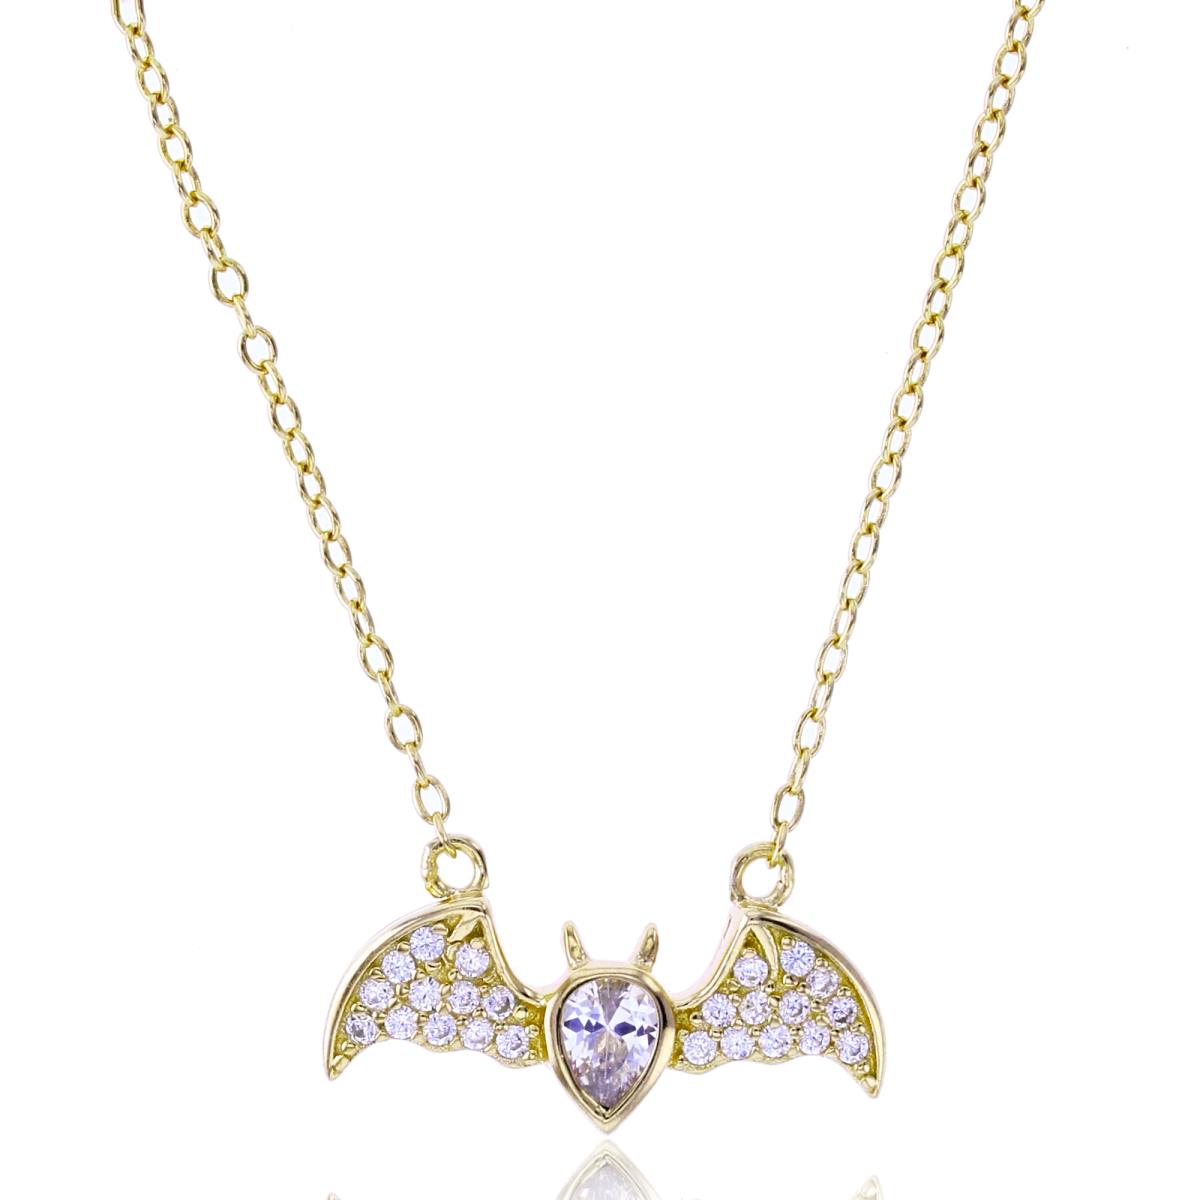 Sterling Silver+1Micron Yellow Gold 4x3mm PS & Rnd CZ Bat Bird 18"Necklace